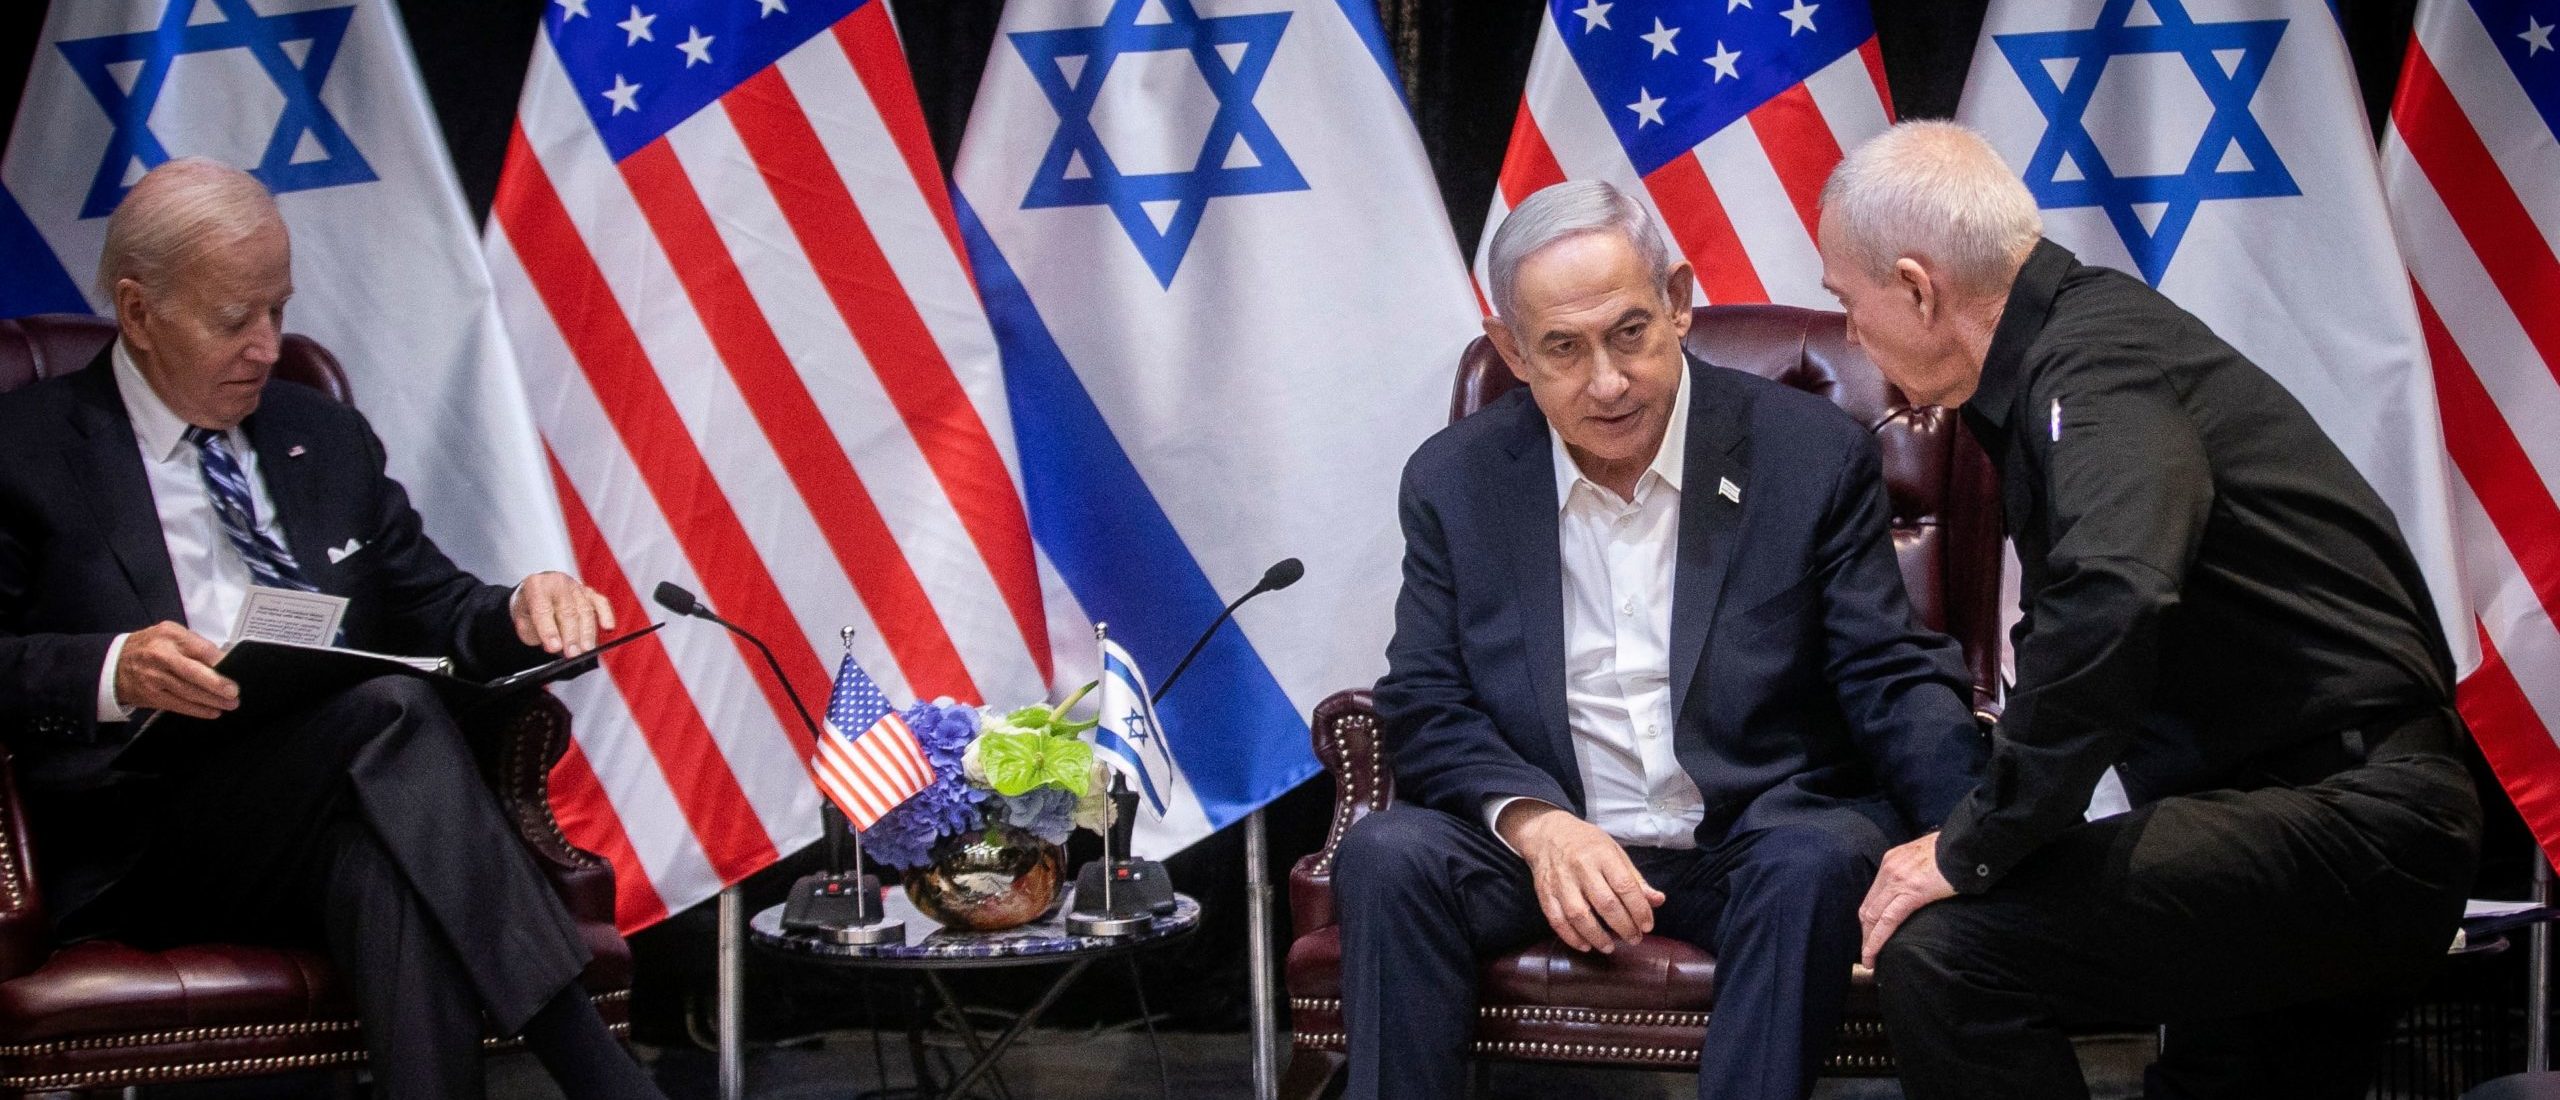 Israeli Prime Minister Benjamin Netanyahu (2nR), confers with Defense Minister Yoav Gallant (R), during their meeting with US President Joe Biden (L) at the start of the Israeli war cabinet meeting, in Tel Aviv on October 18, 2023, amid the ongoing battles between Israel and the Palestinian group Hamas. US President Joe Biden landed in Tel Aviv on October 18, 2023 as Middle East anger flared after hundreds were killed when a rocket struck a hospital in war-torn Gaza, with Israel and the Palestinians quick to trade blame. (Photo by Miriam Alster / POOL / AFP) (Photo by MIRIAM ALSTER/POOL/AFP via Getty Images)